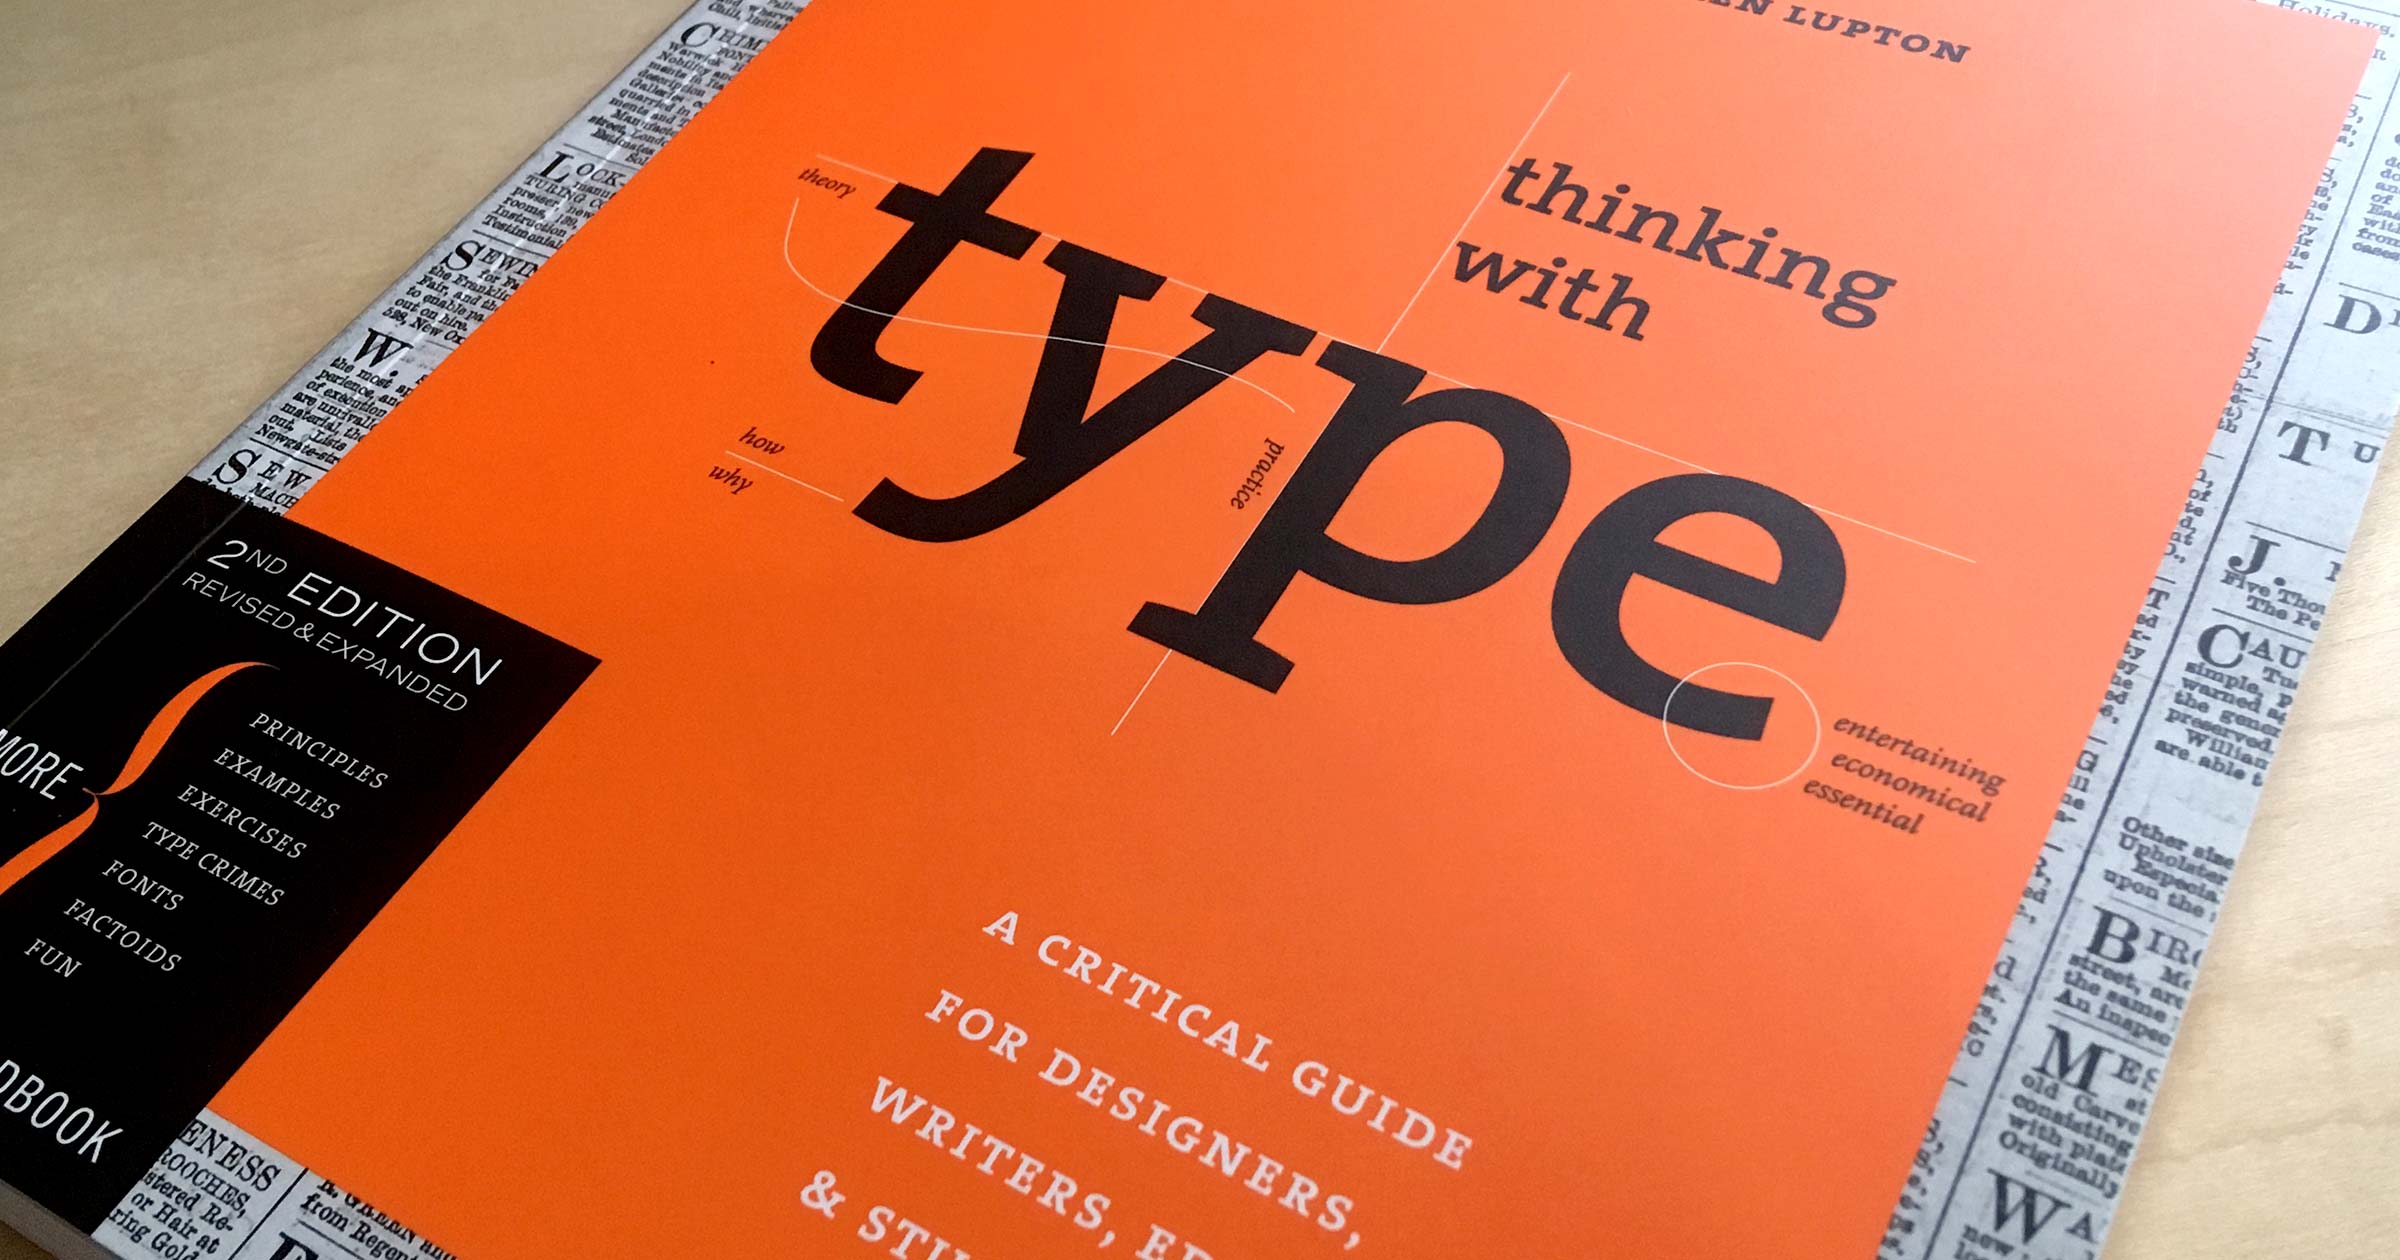 Thinking With Type by Ellen Lupton